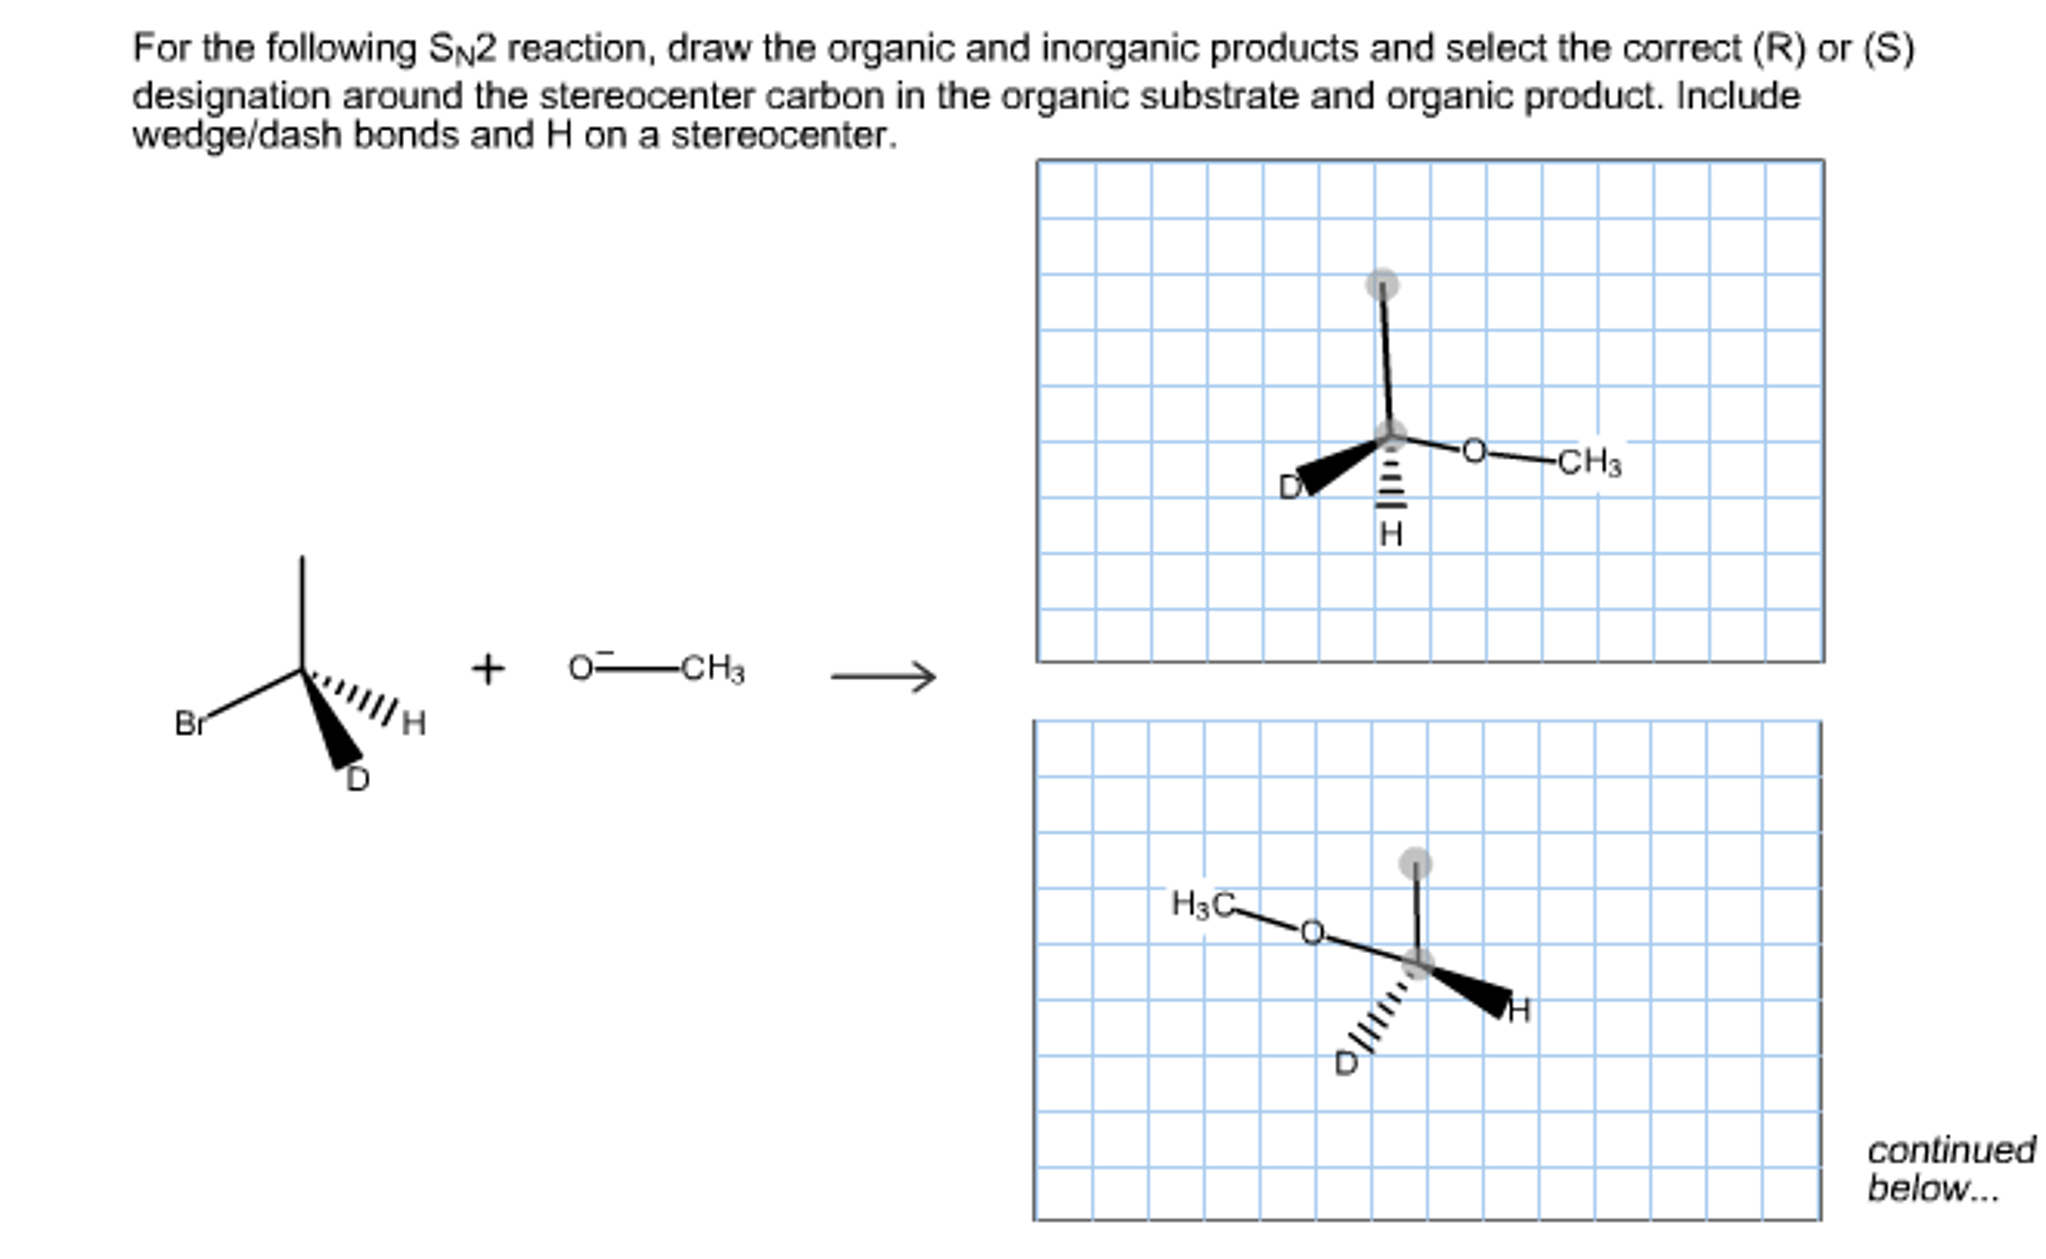 Solved For the following SN2 reaction, draw the organic and